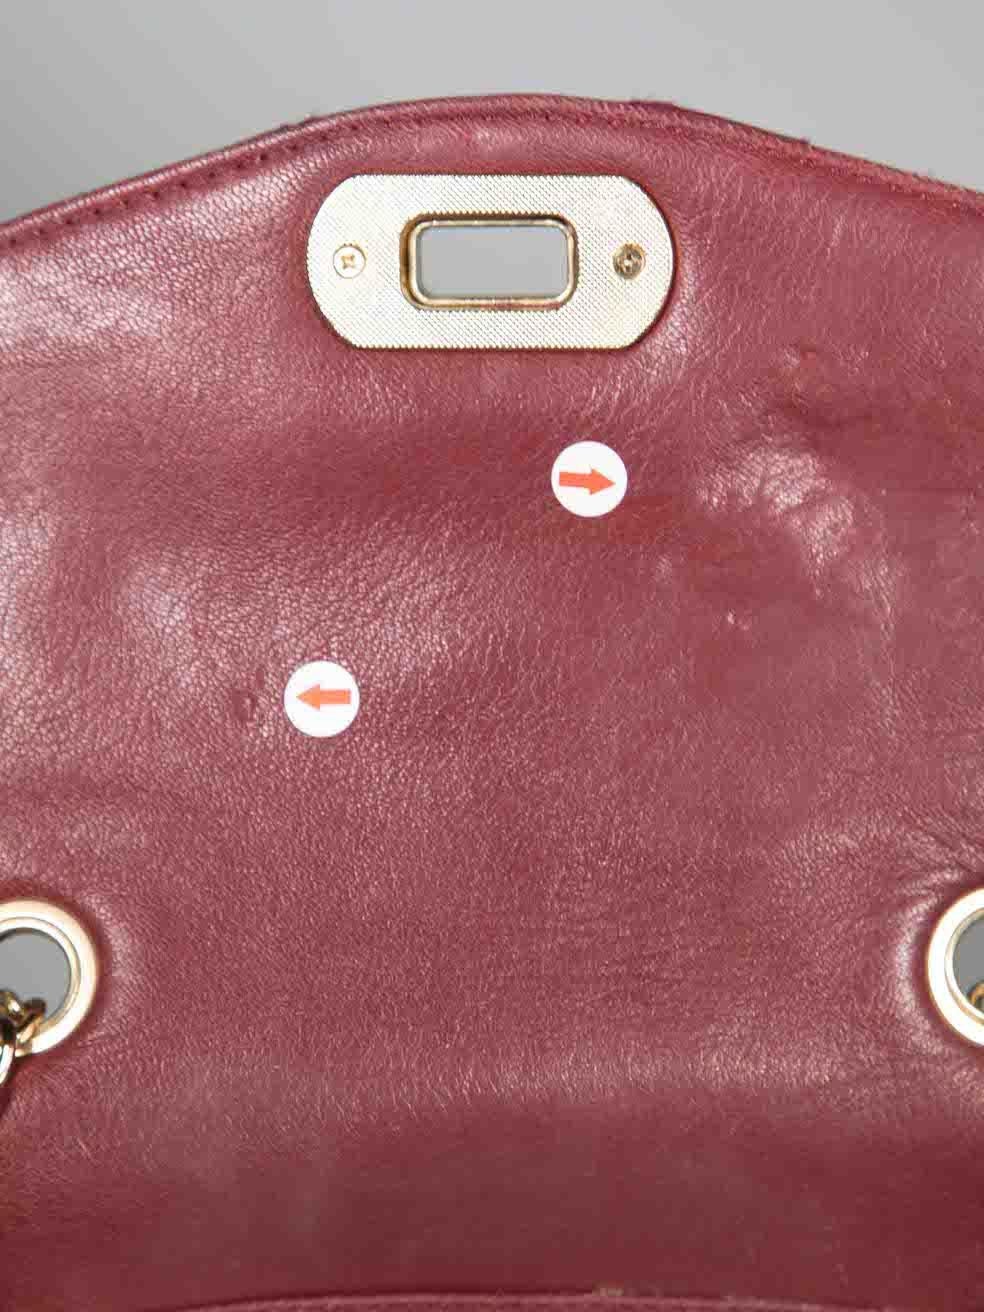 Zadig & Voltaire Burgundy XS Skinny Love Scales Crossbody For Sale 3